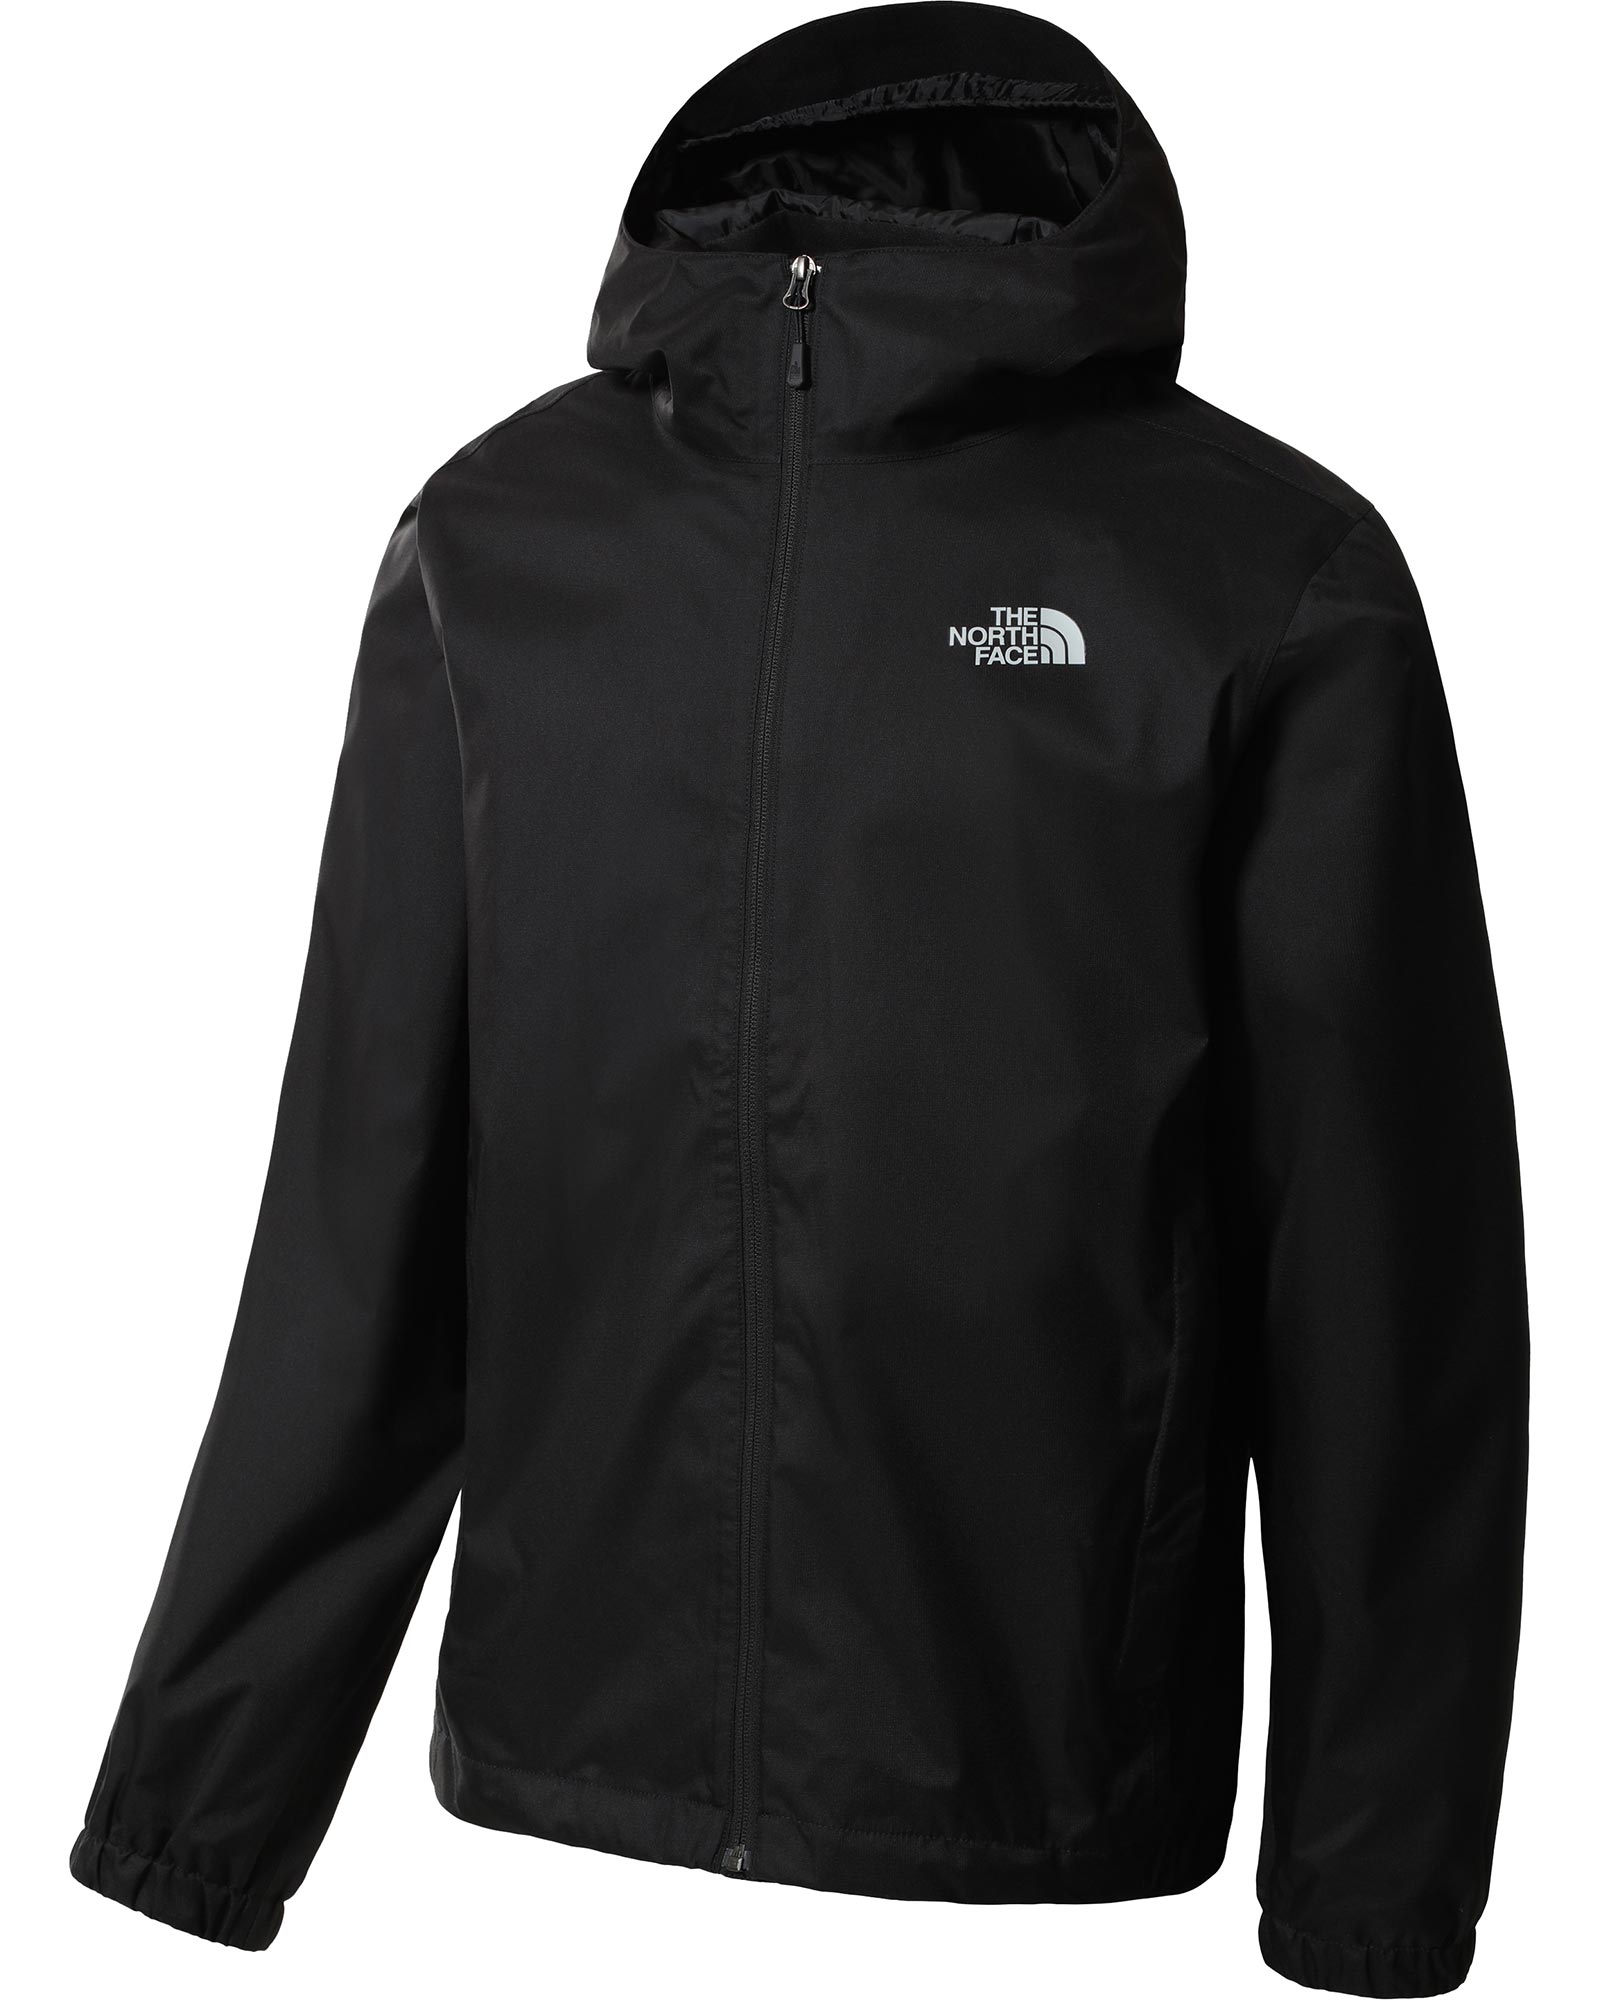 The North Face Quest DryVent Men’s Jacket - TNF Black XS